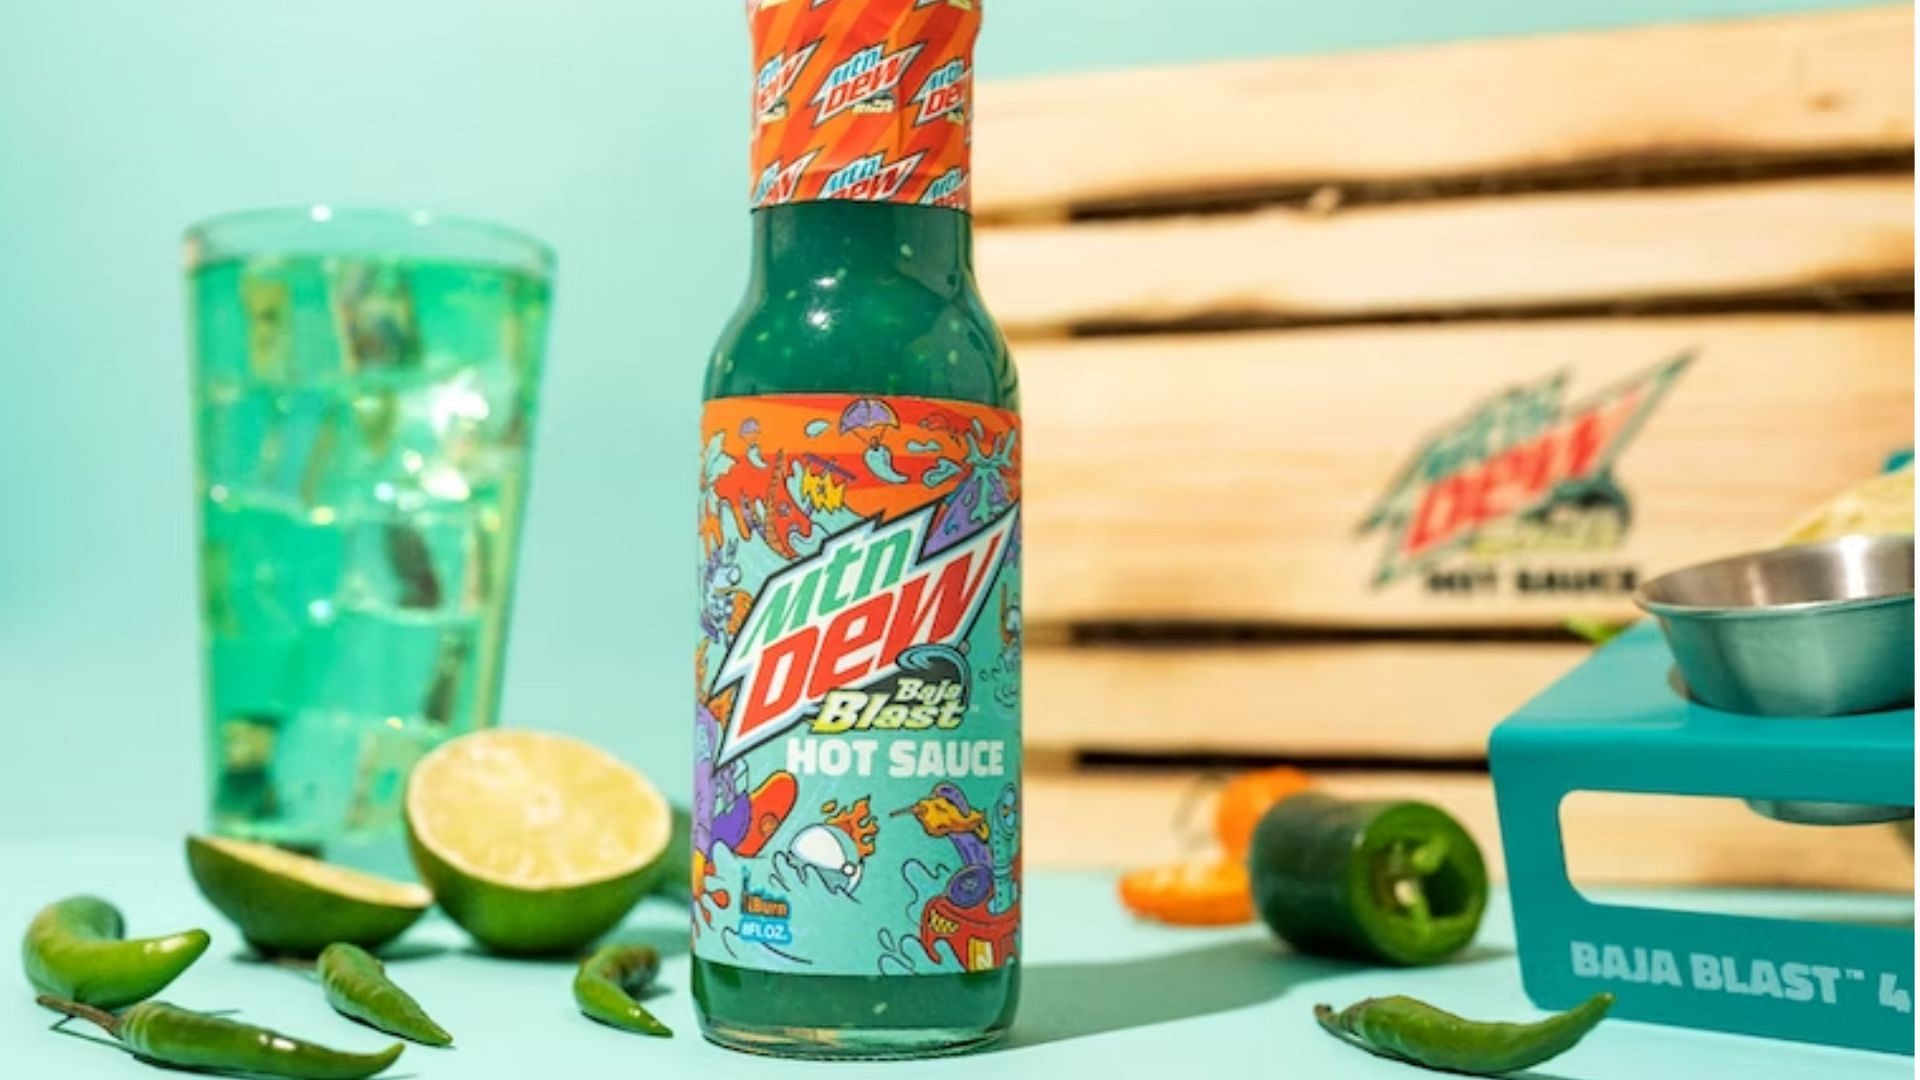 The limited-edition Baja Blast Hot Sauce will only be available through the sweepstakes that ends on February 8 (Image via Mountain Dew)